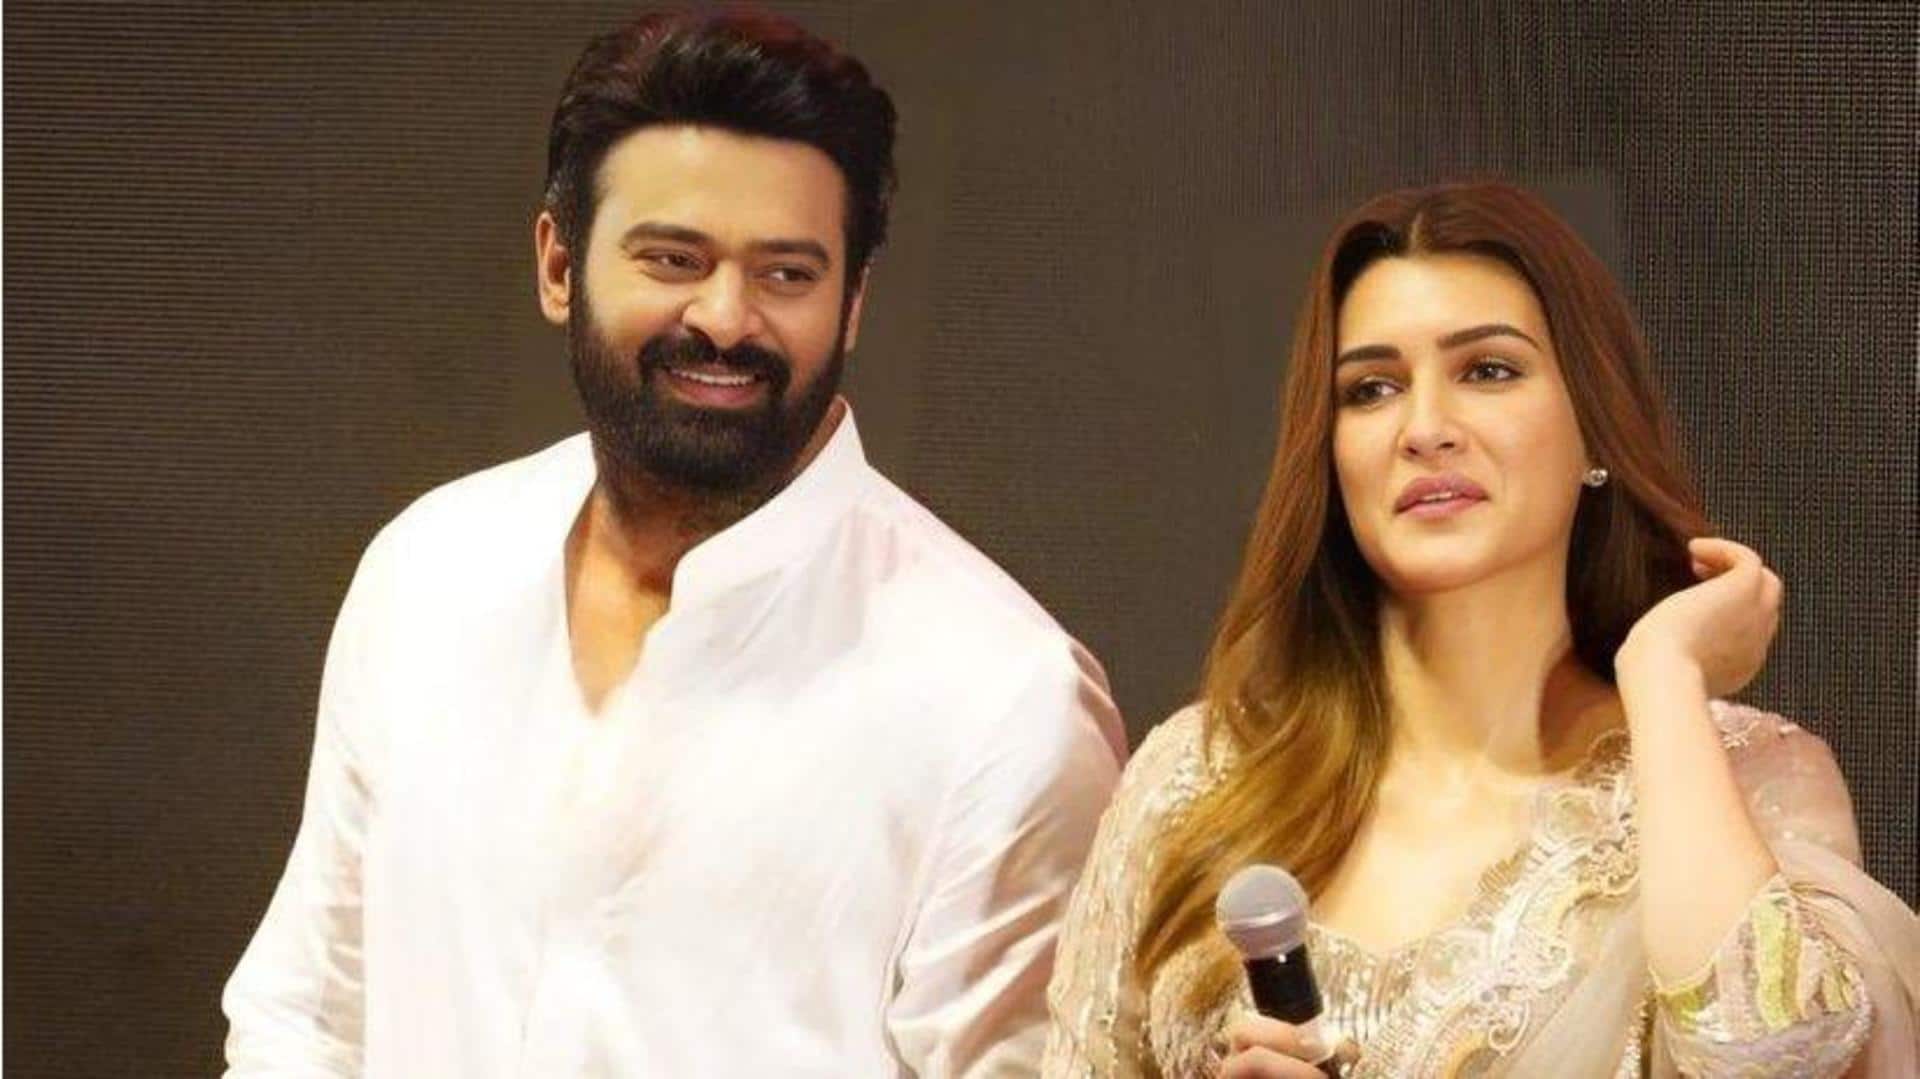 Kriti Sanon says given a chance she would marry Prabhas